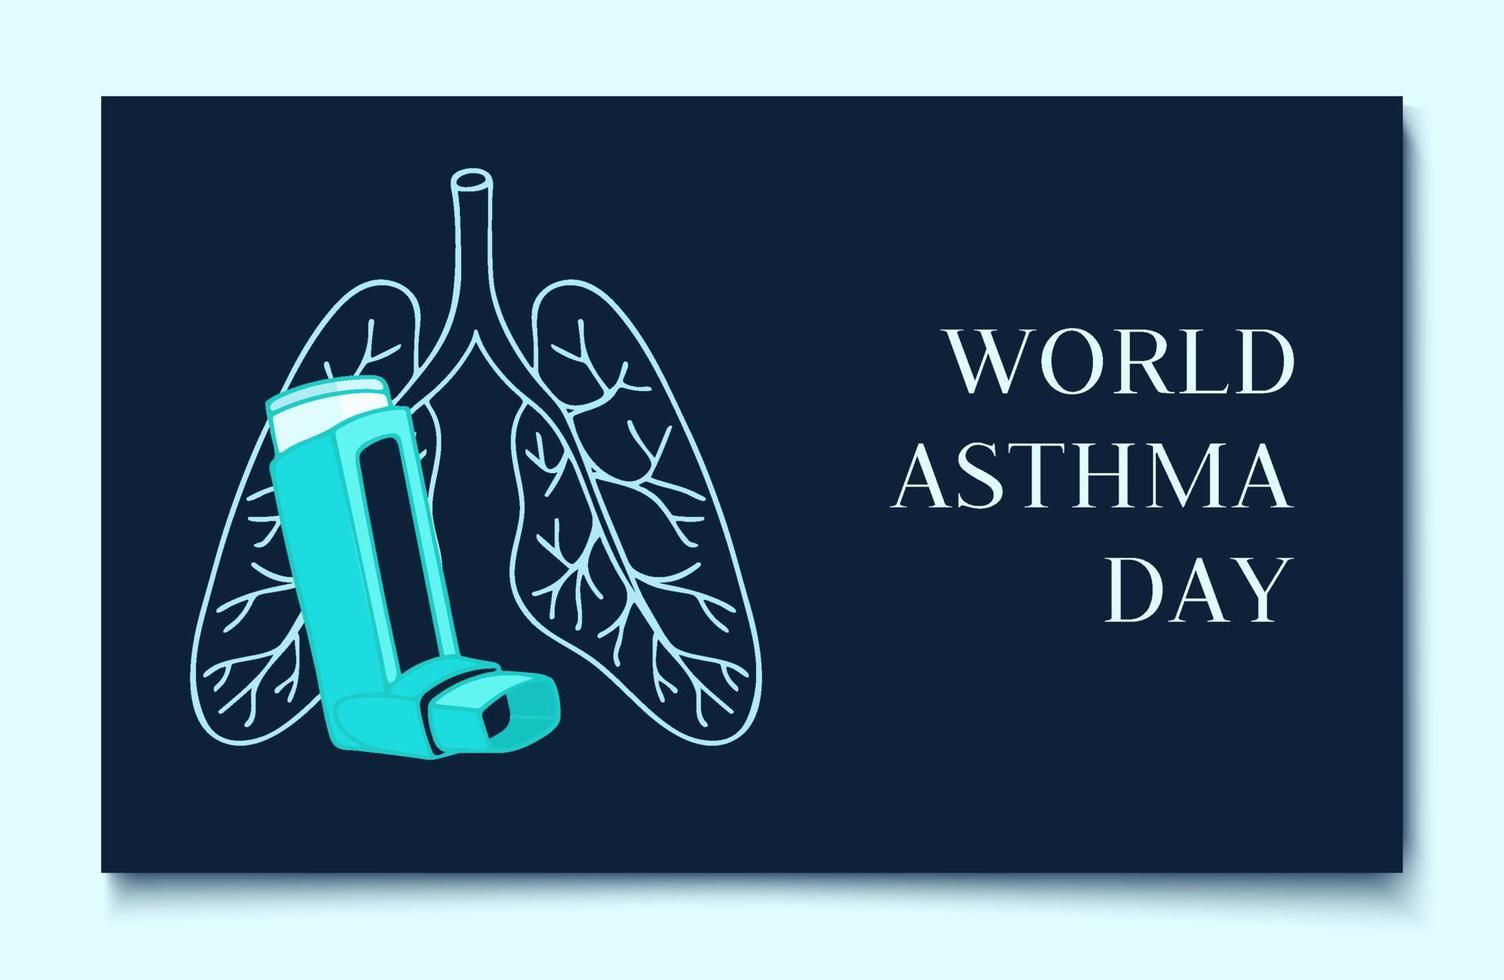 World Asthma Day banner template. Vector illustration of inhaler and lungs on dark background. Bronchial asthma awareness sign.